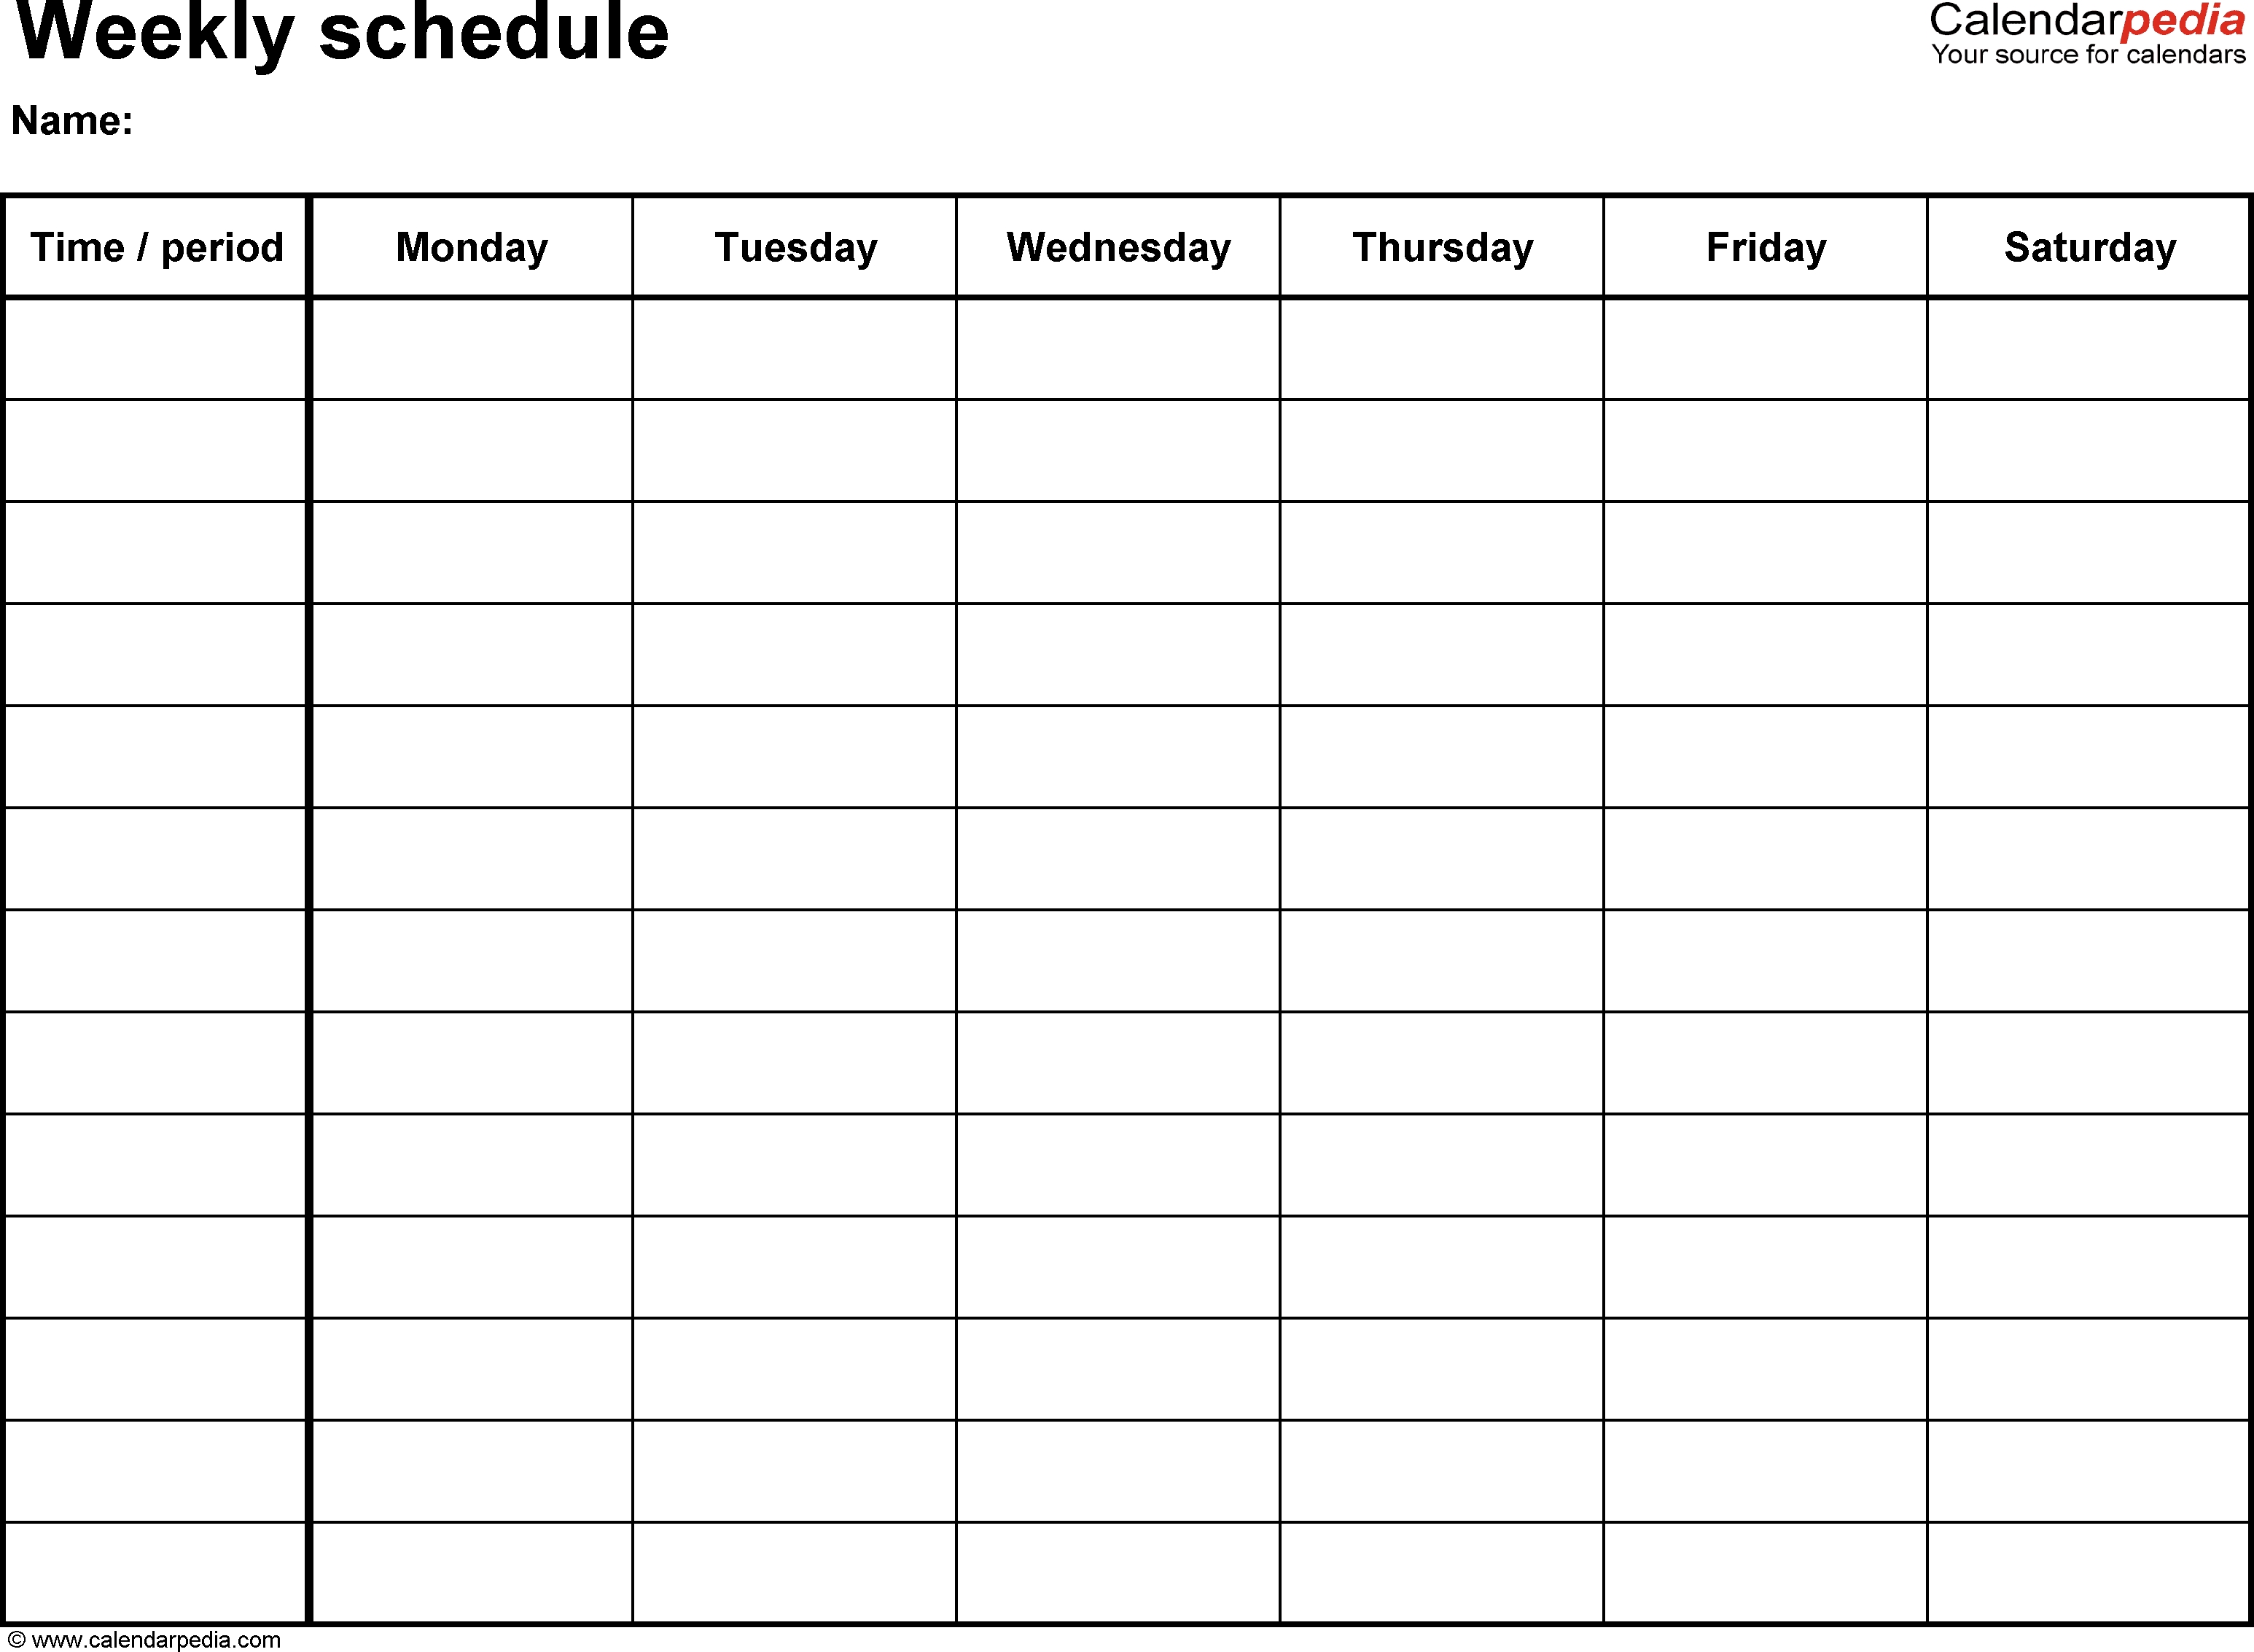 Free Weekly Schedule Templates For Word - 18 Templates inside One Week Calendar Template With Hours